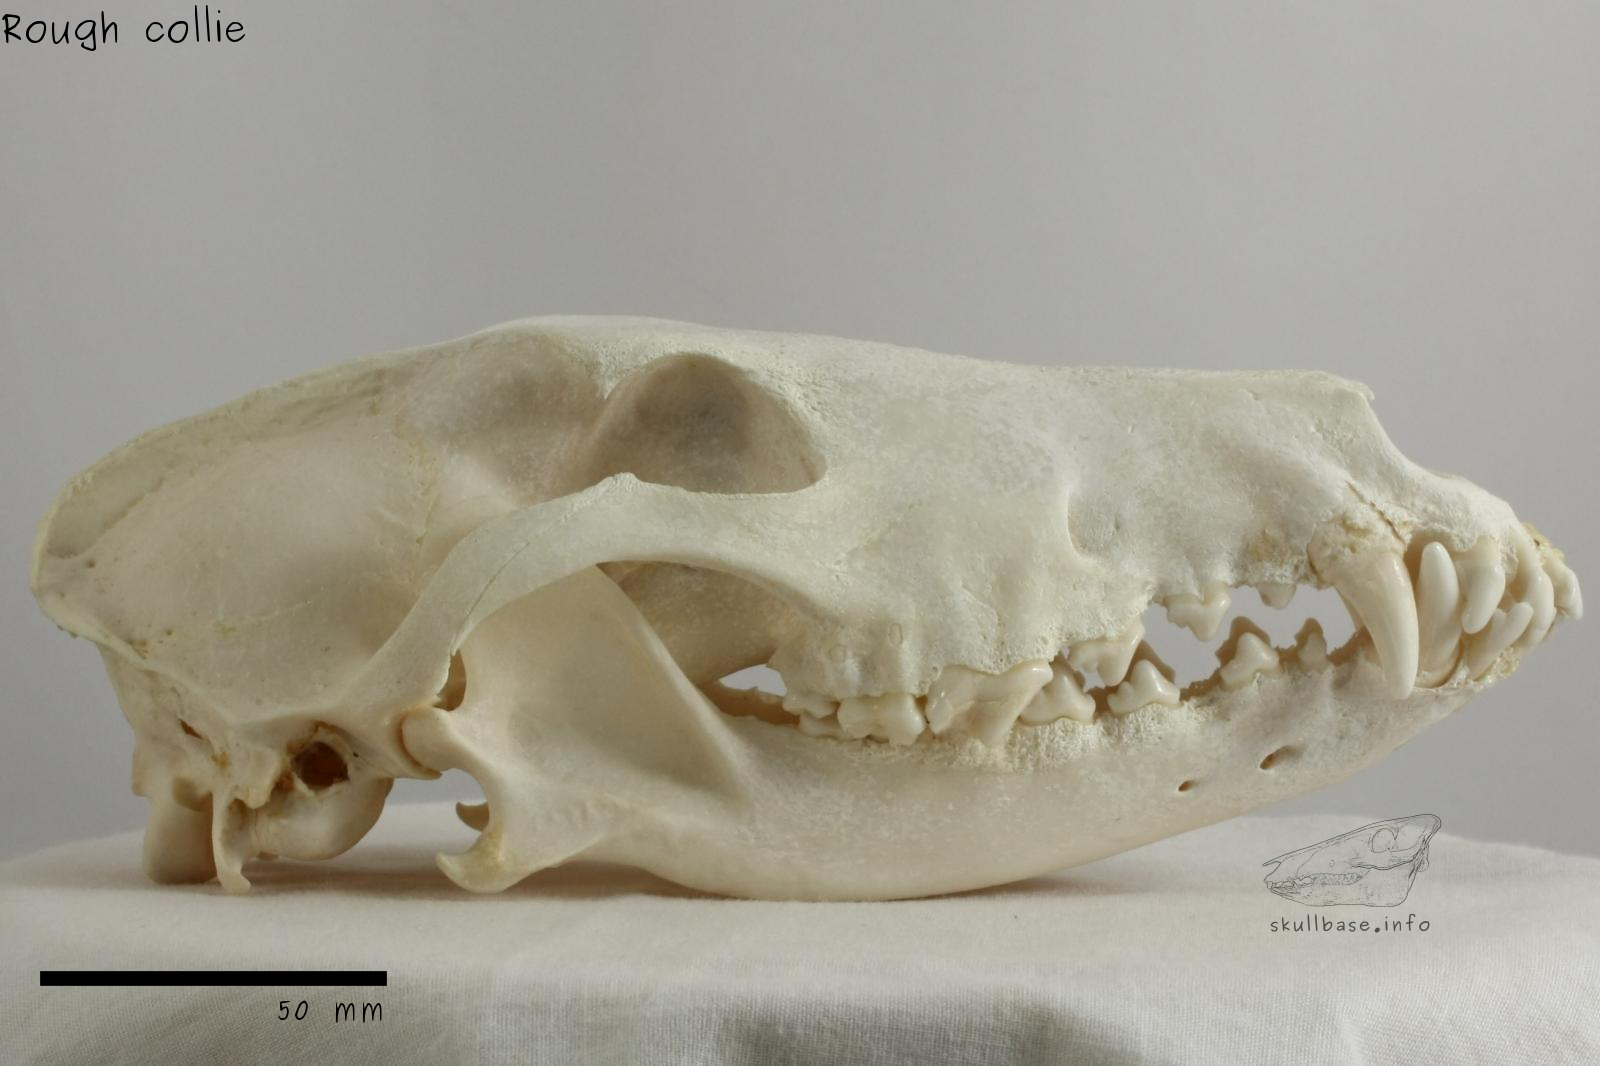 Rough collie (Canis lupus familiaris) skull lateral view